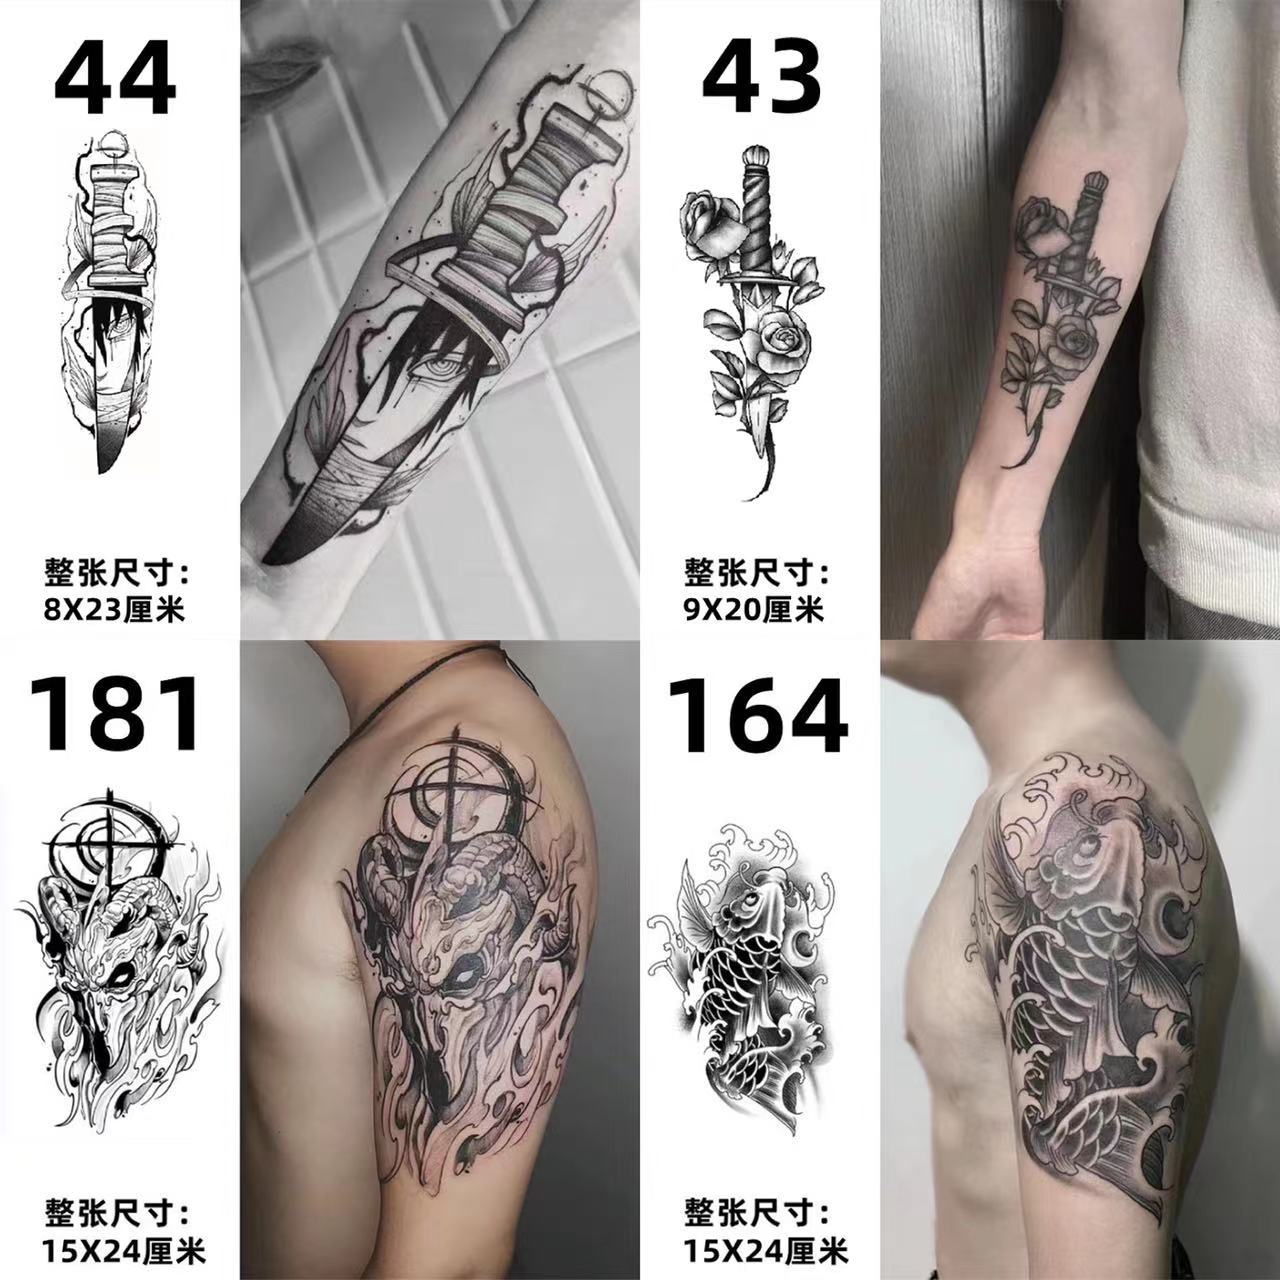 Juice herbal tattoo stickers semi-permanent lasting 15 days dark blue and white arm slow color gradient can not be washed off waterproof